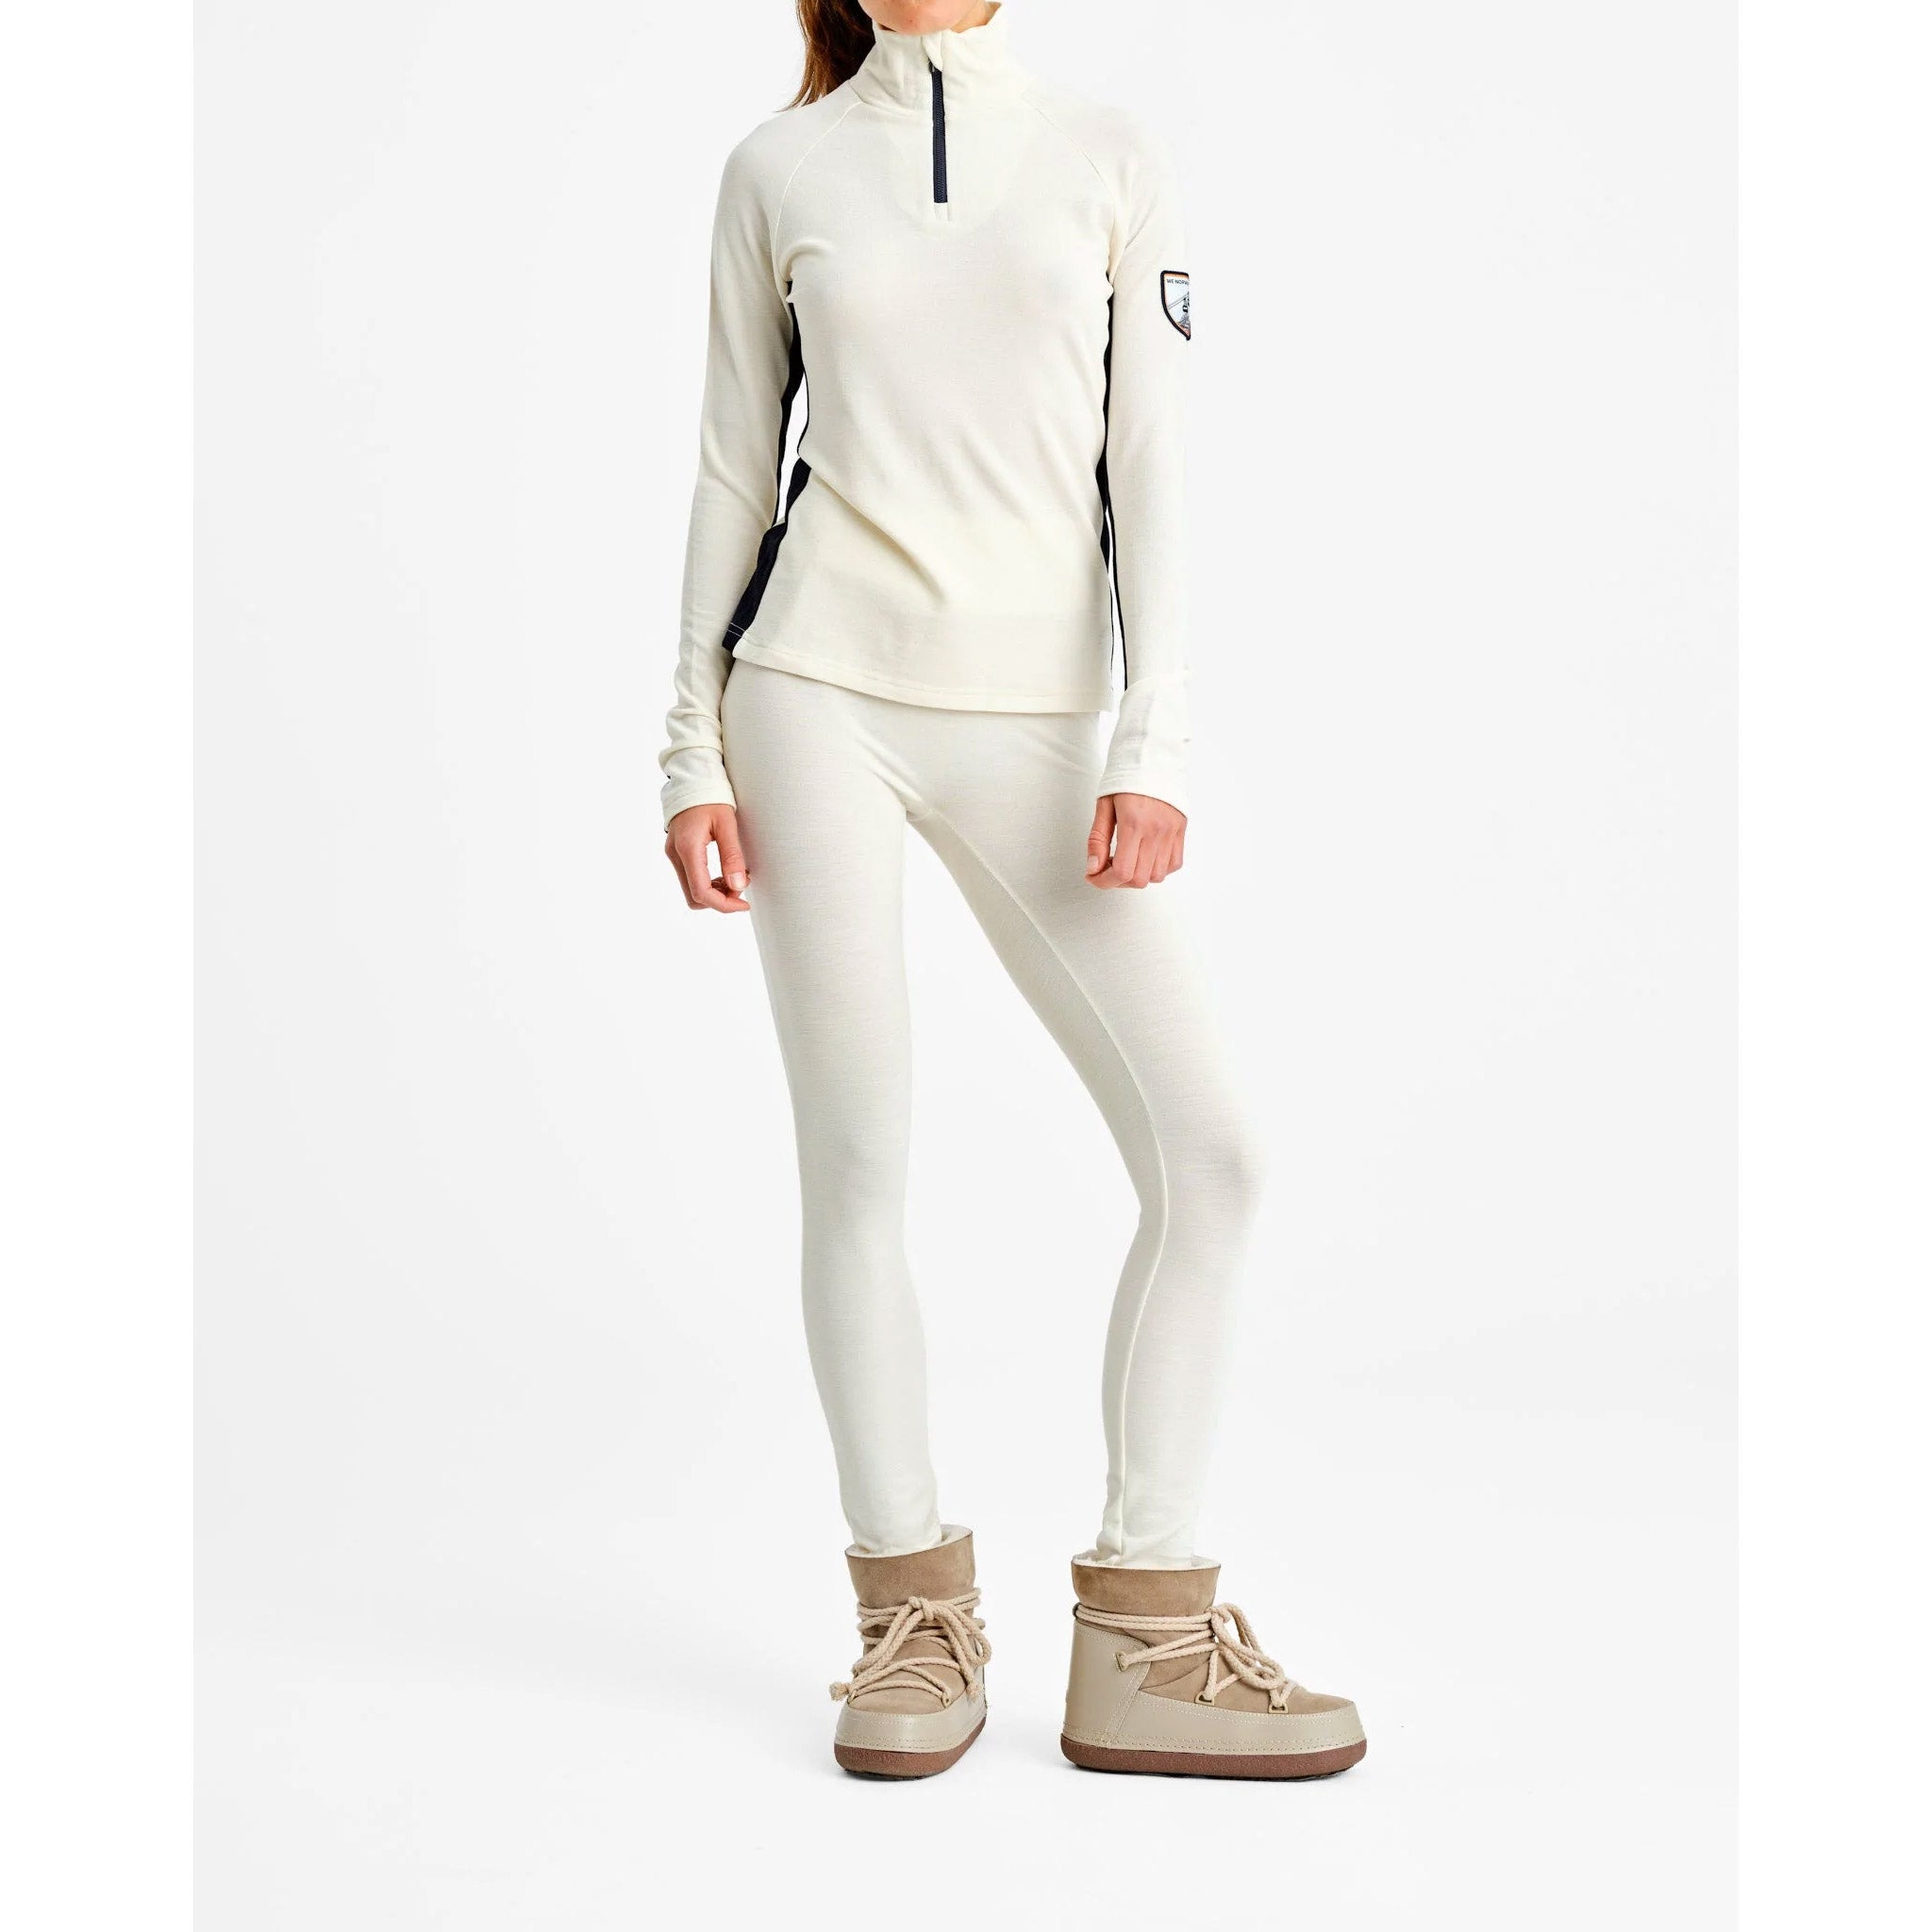 Voss Zipup Sweater in White